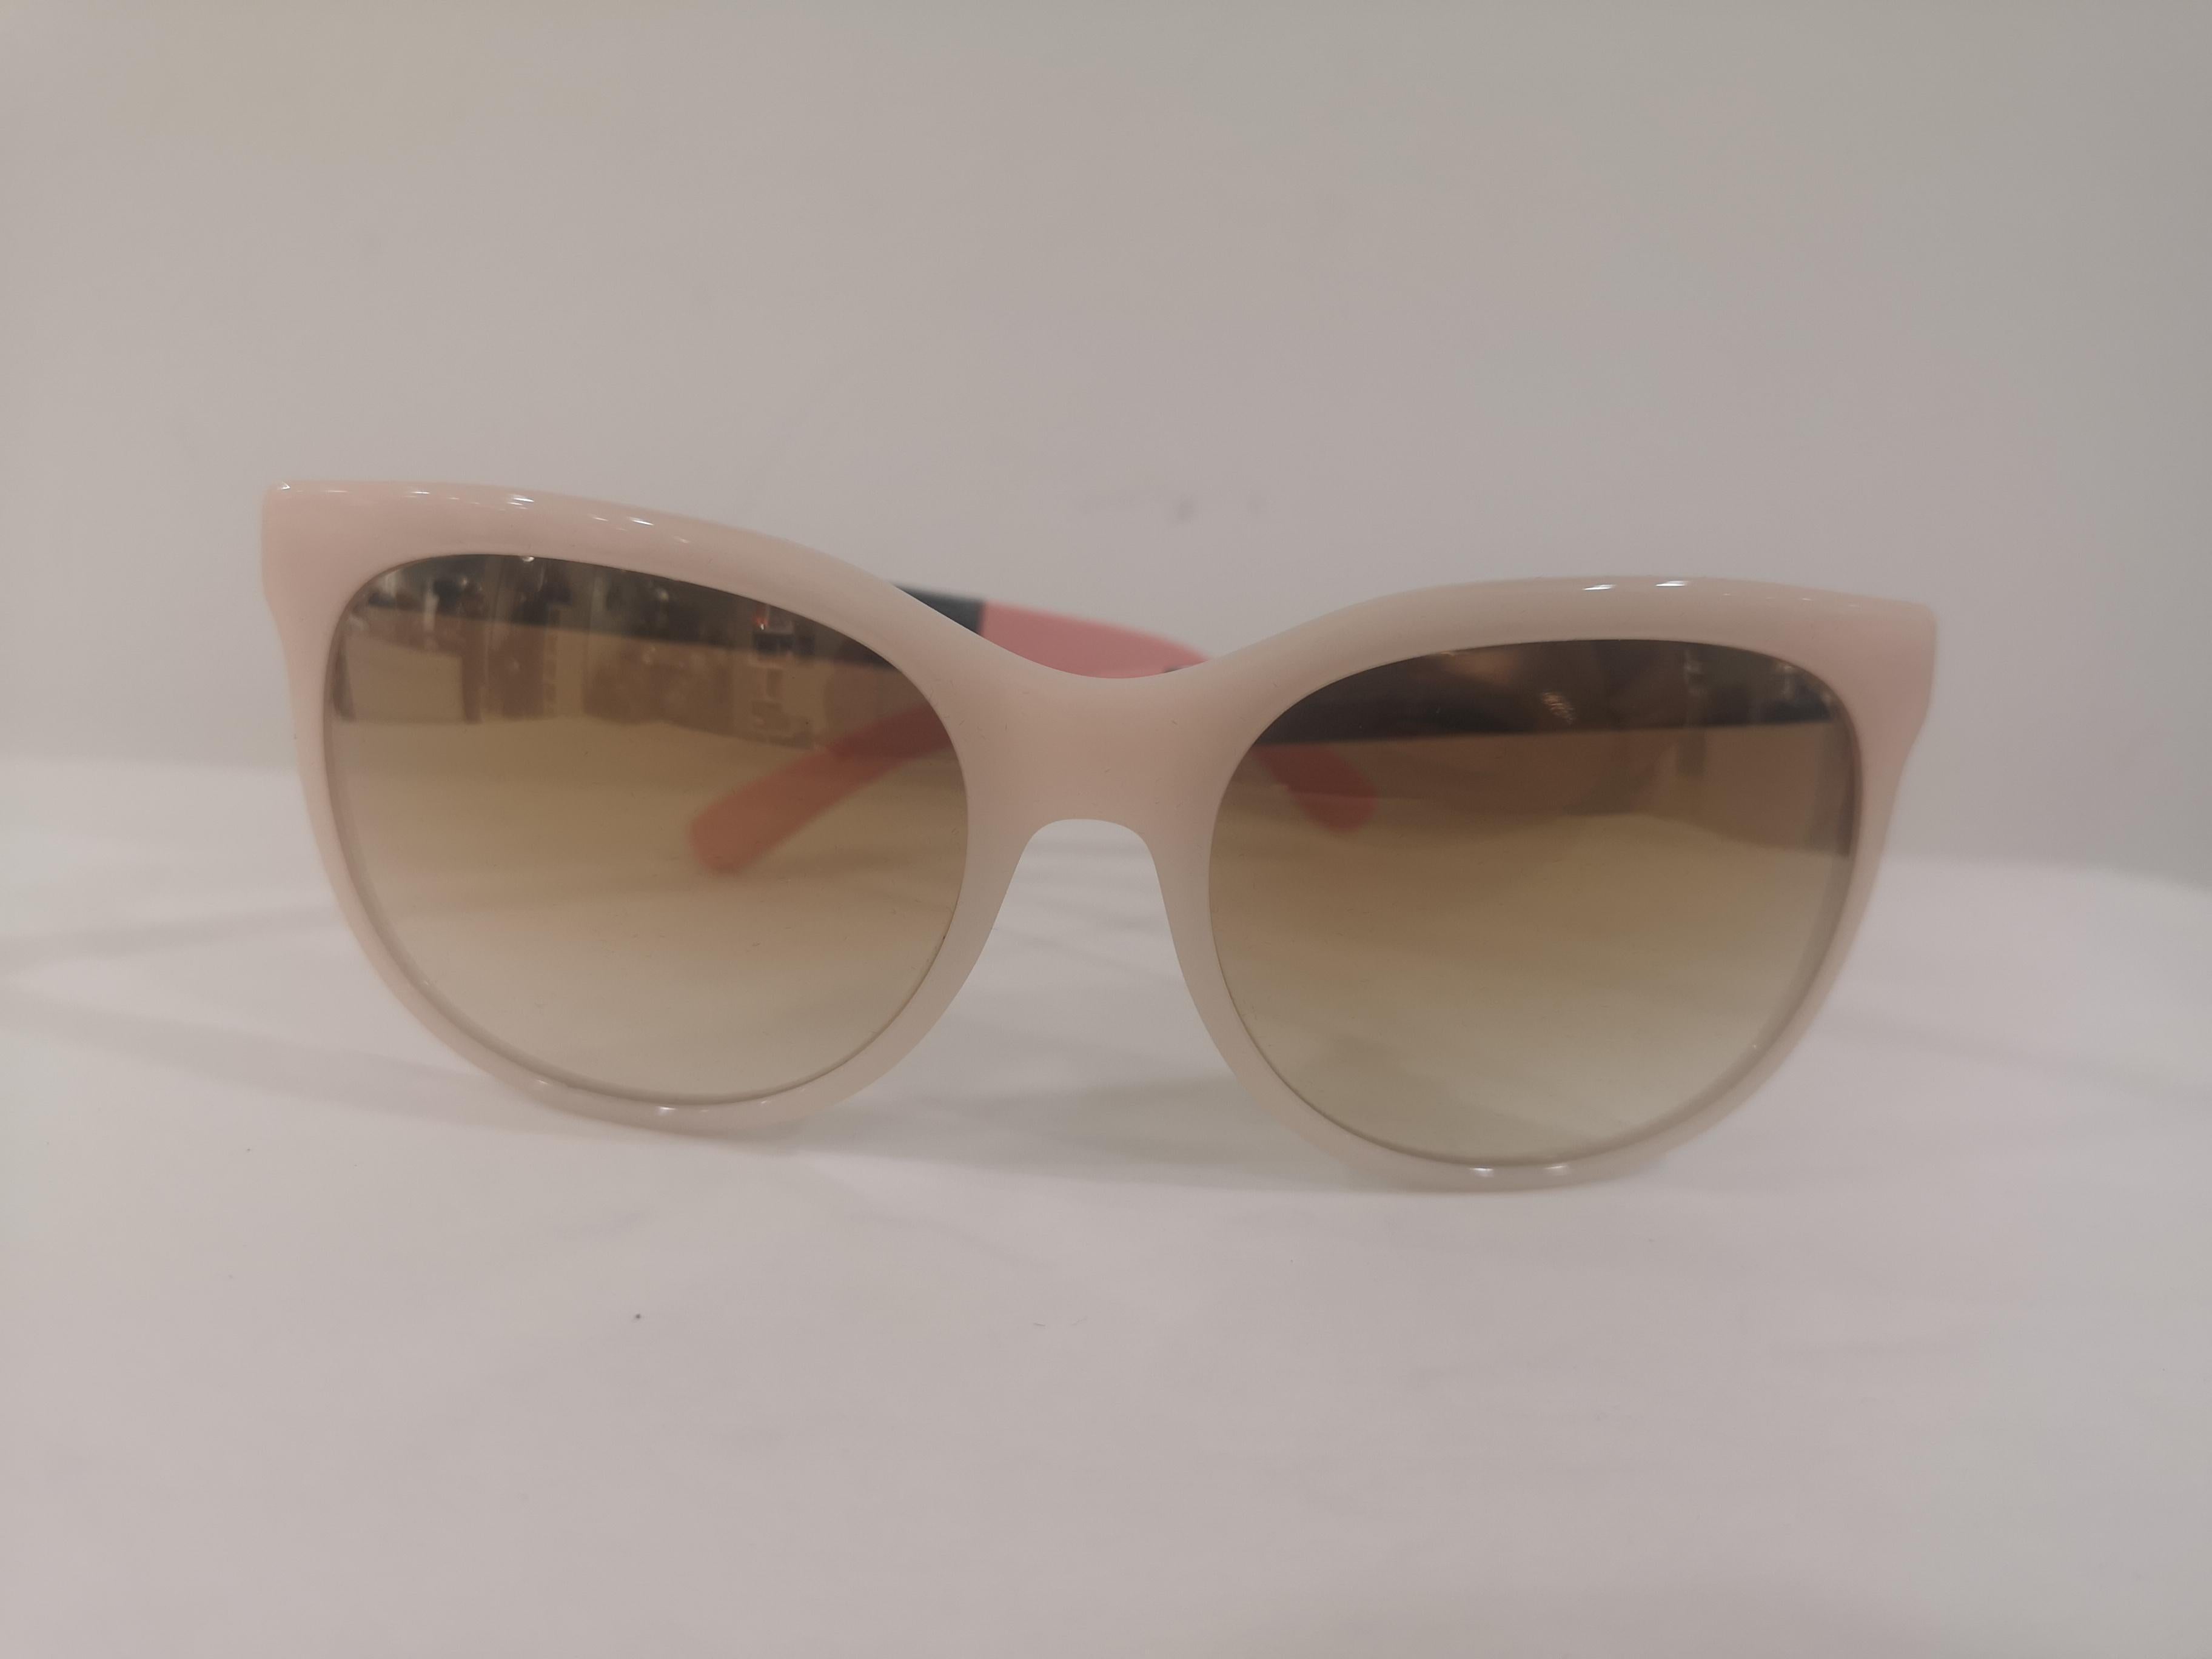 Orange Marc by Marc Jacobs peach pink sunglasses NWOT For Sale